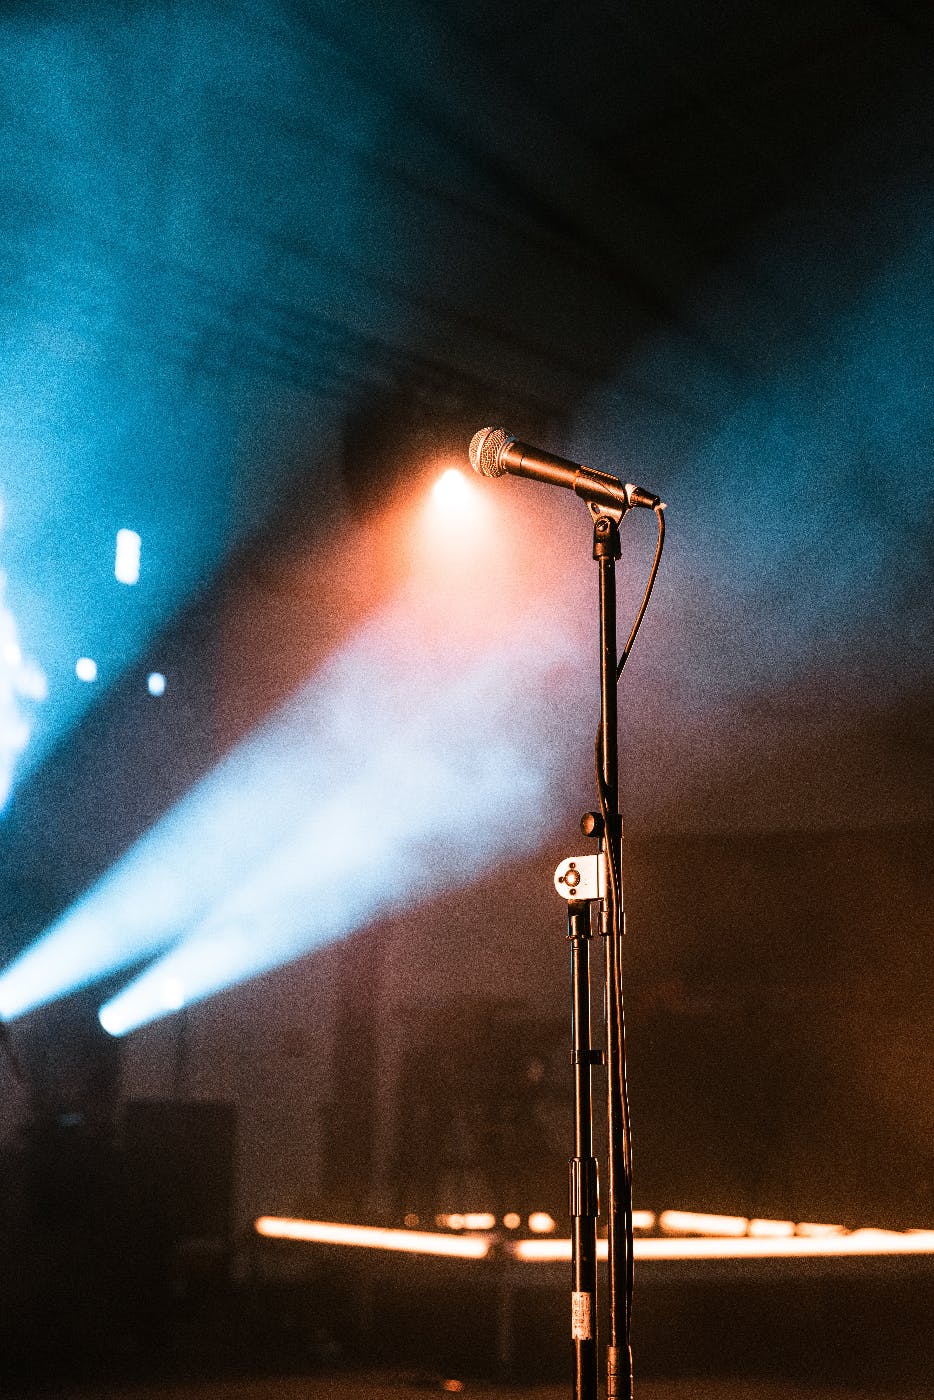 A mic on a stand in a spotlight